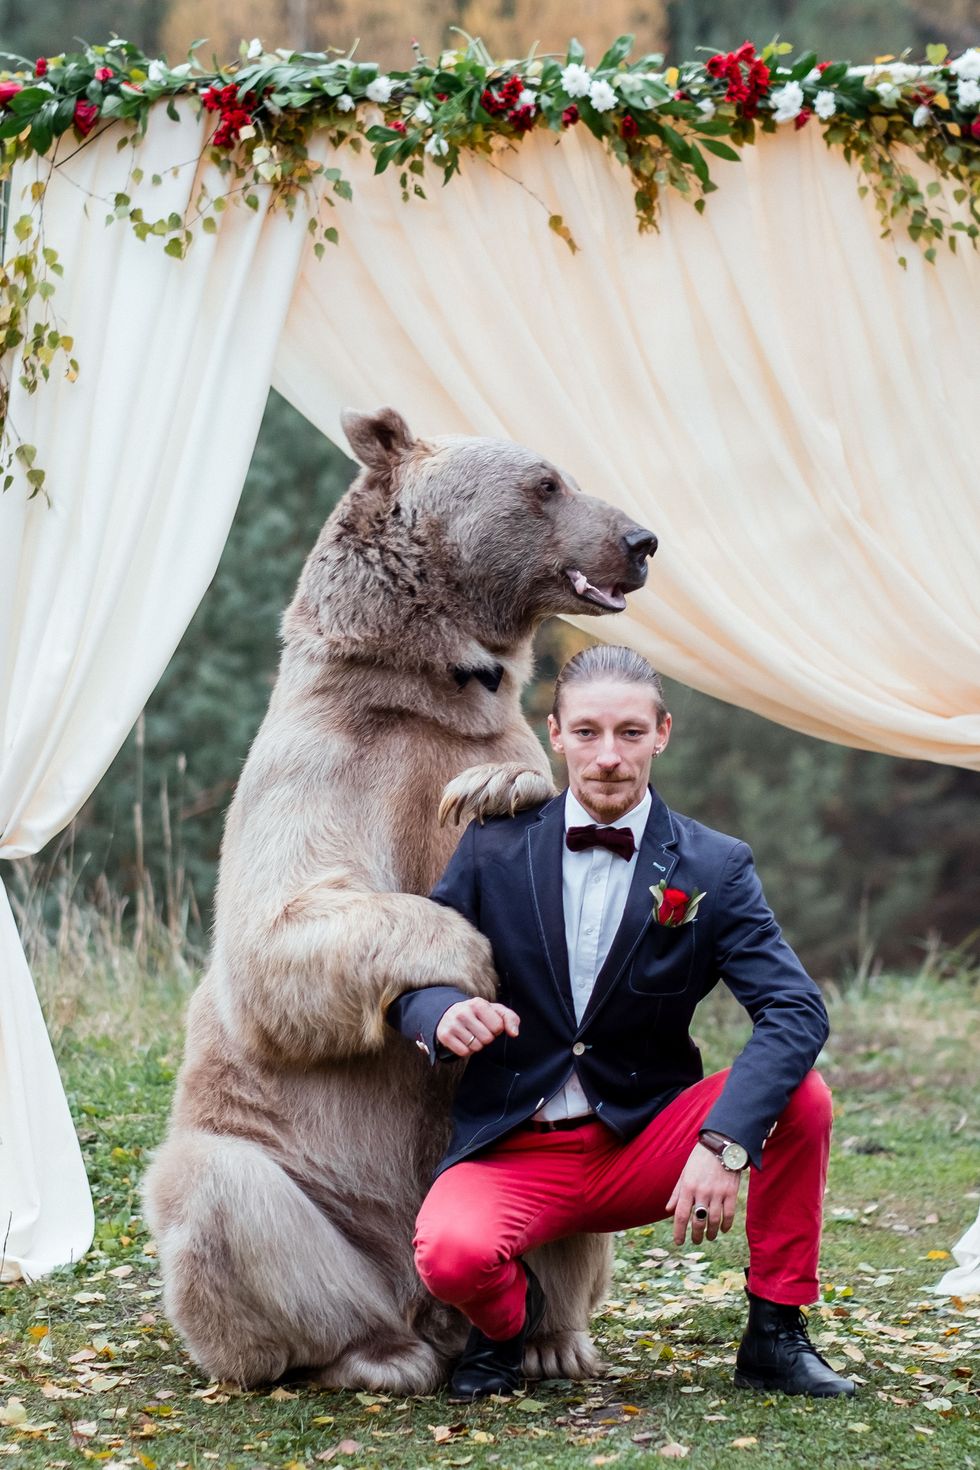 Russian Couple Gets Married by Bear - Why That's Not OK